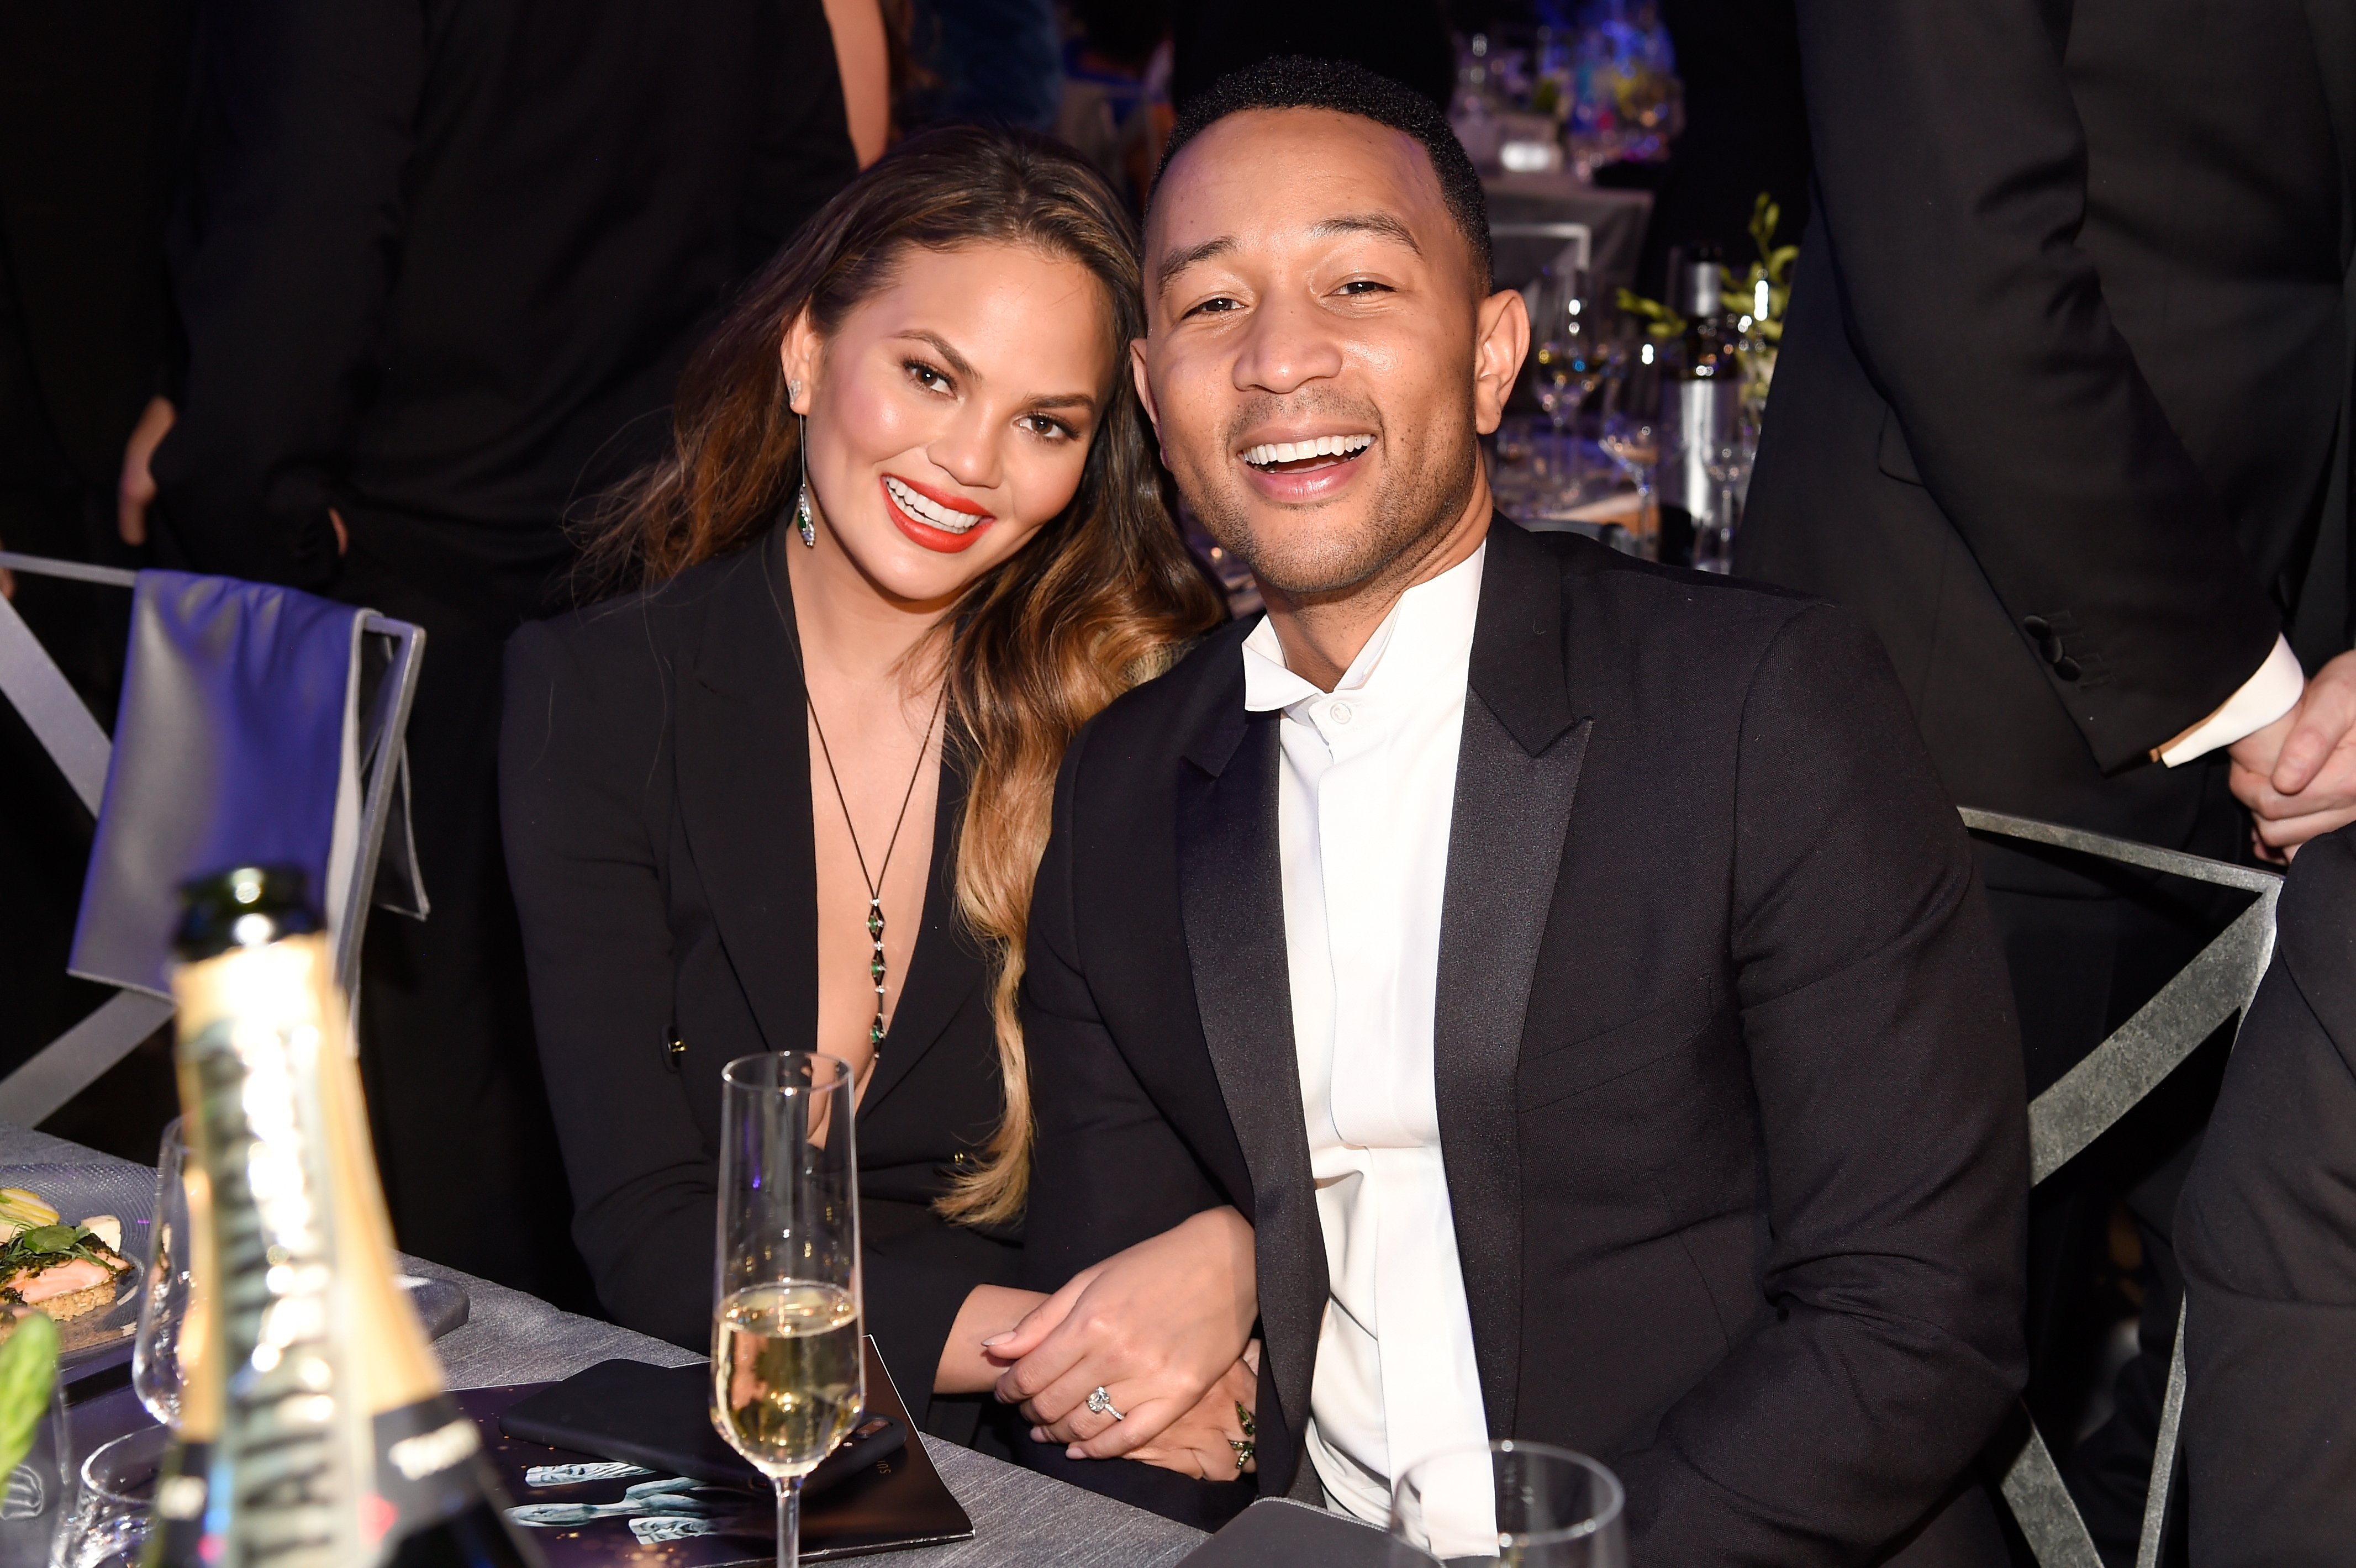 Chrissy Teigen and John Legend attend the Annual Screen Actors Guild Awards in Los Angeles on January 29, 2017. | Photo: Getty Images